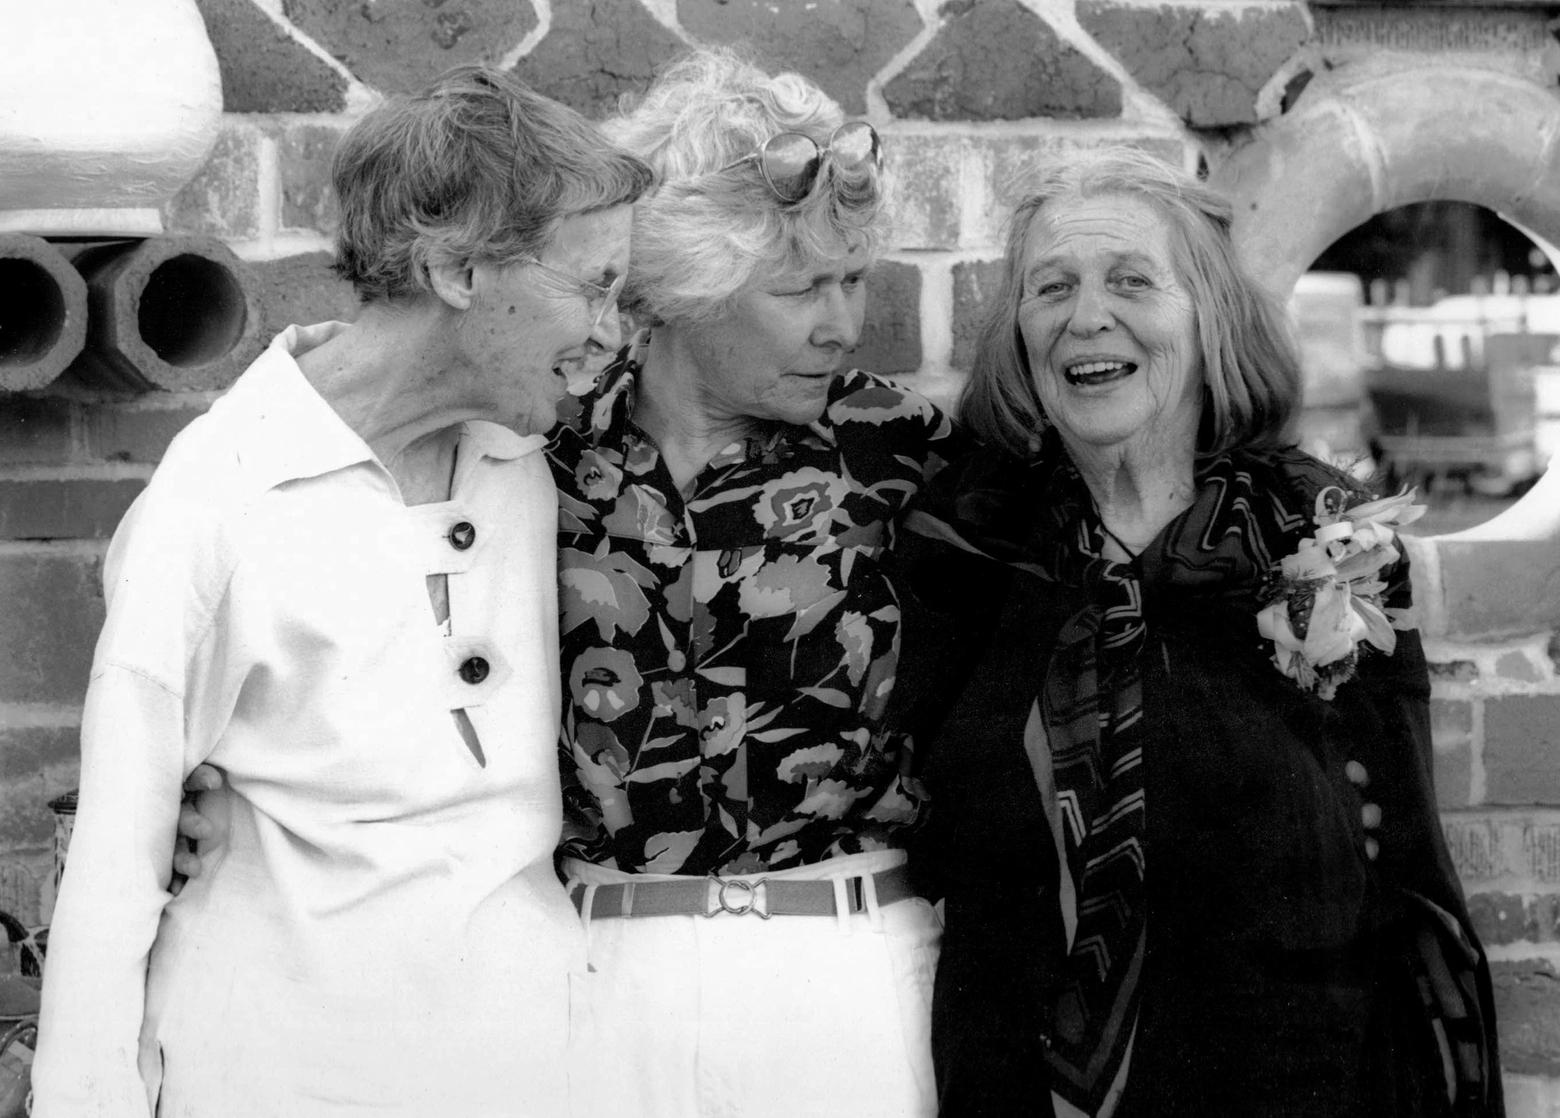 Art friends: Frances Senska, left, Leila Autio and Gennie DeWeese, right, at the Archie Bray Foundation in Helena, Montana, 1993.